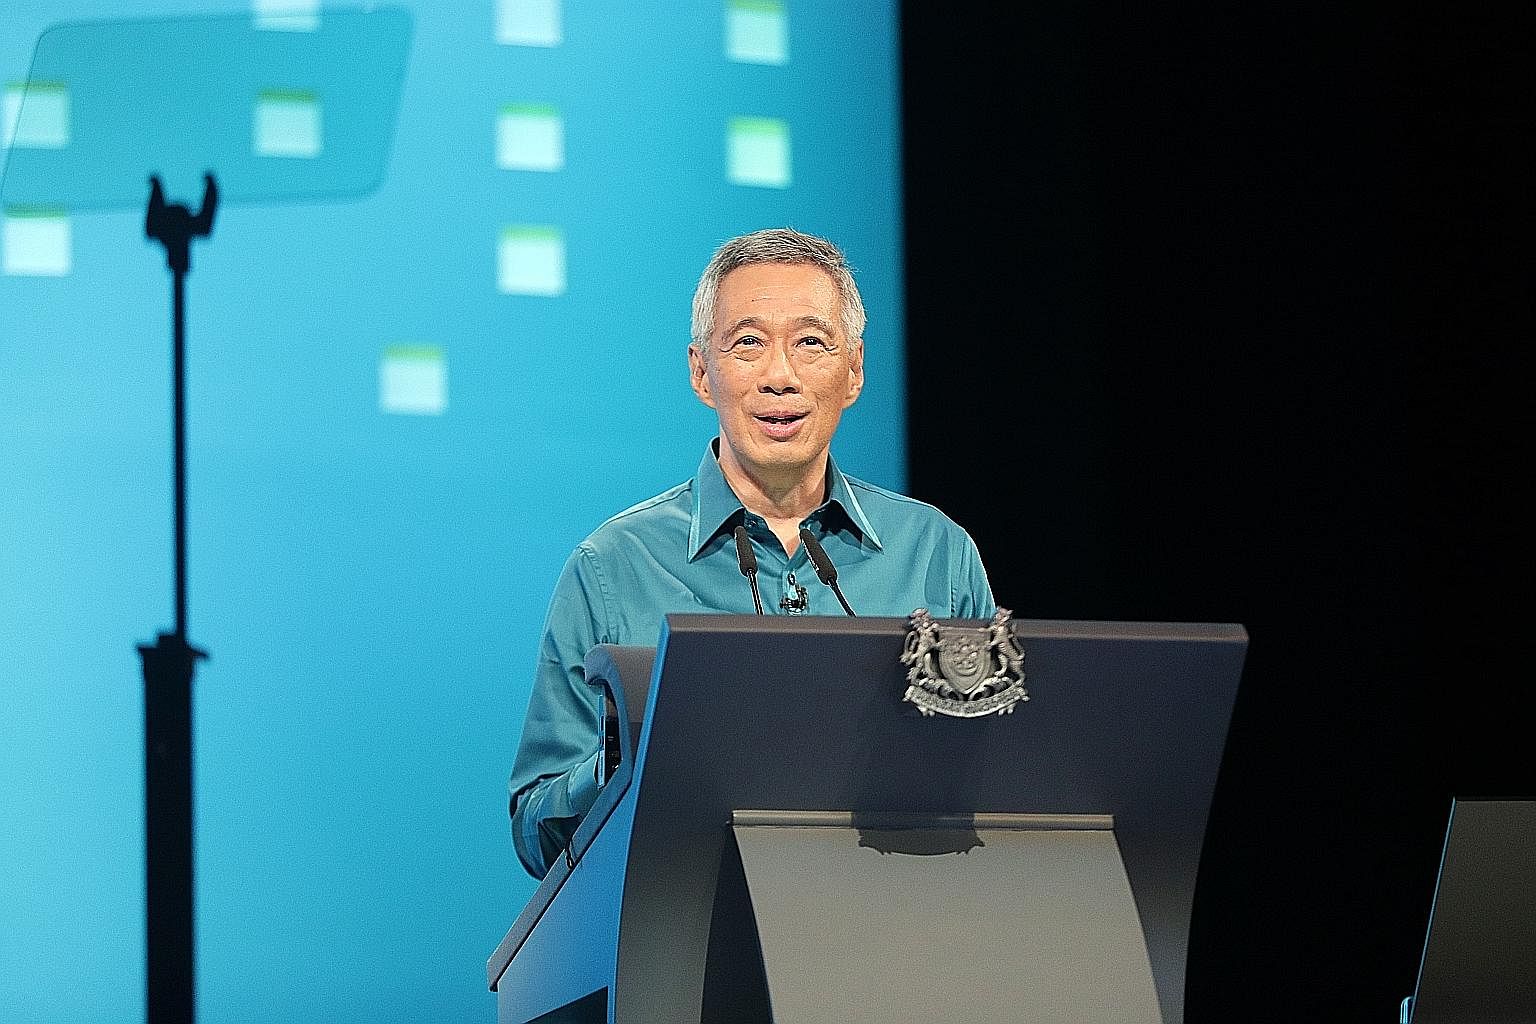 Noting that public housing in Singapore is really "national housing", Prime Minister Lee Hsien Loong said at the National Day Rally that "we made it happen through sound policies, unwavering political resolve and the strong support of Singaporeans".